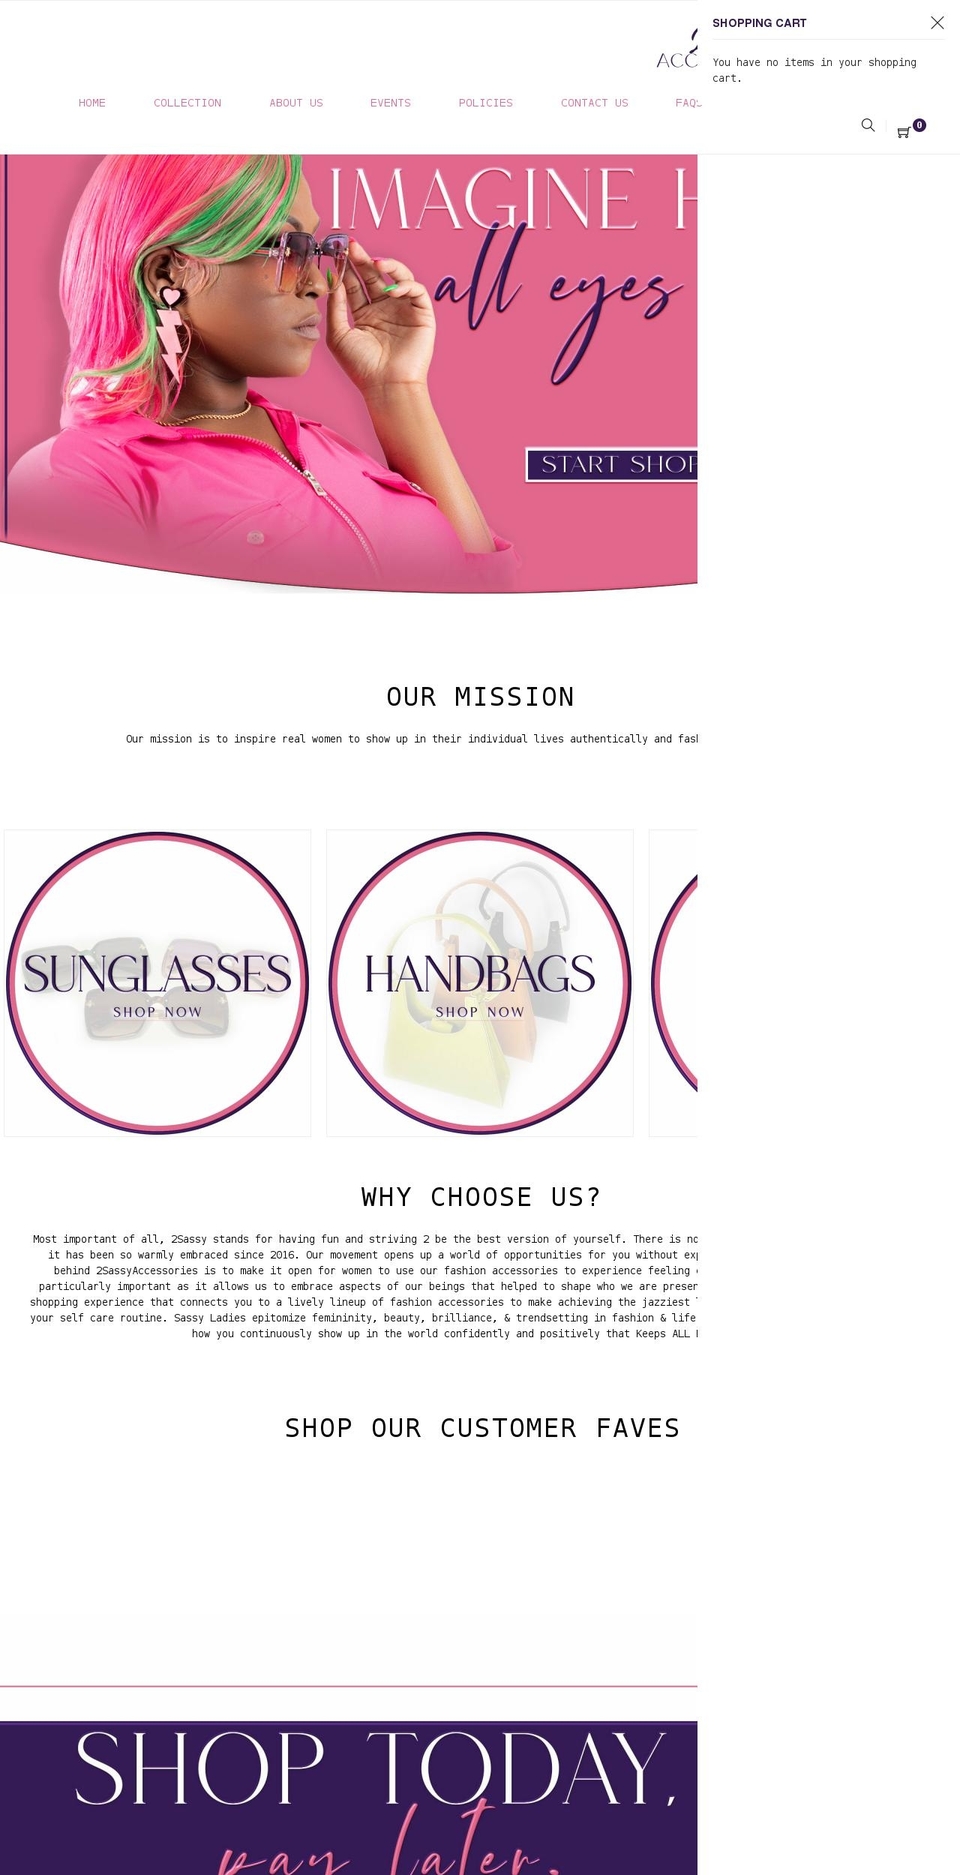 Amely Shopify theme site example 2sassyaccessories.com